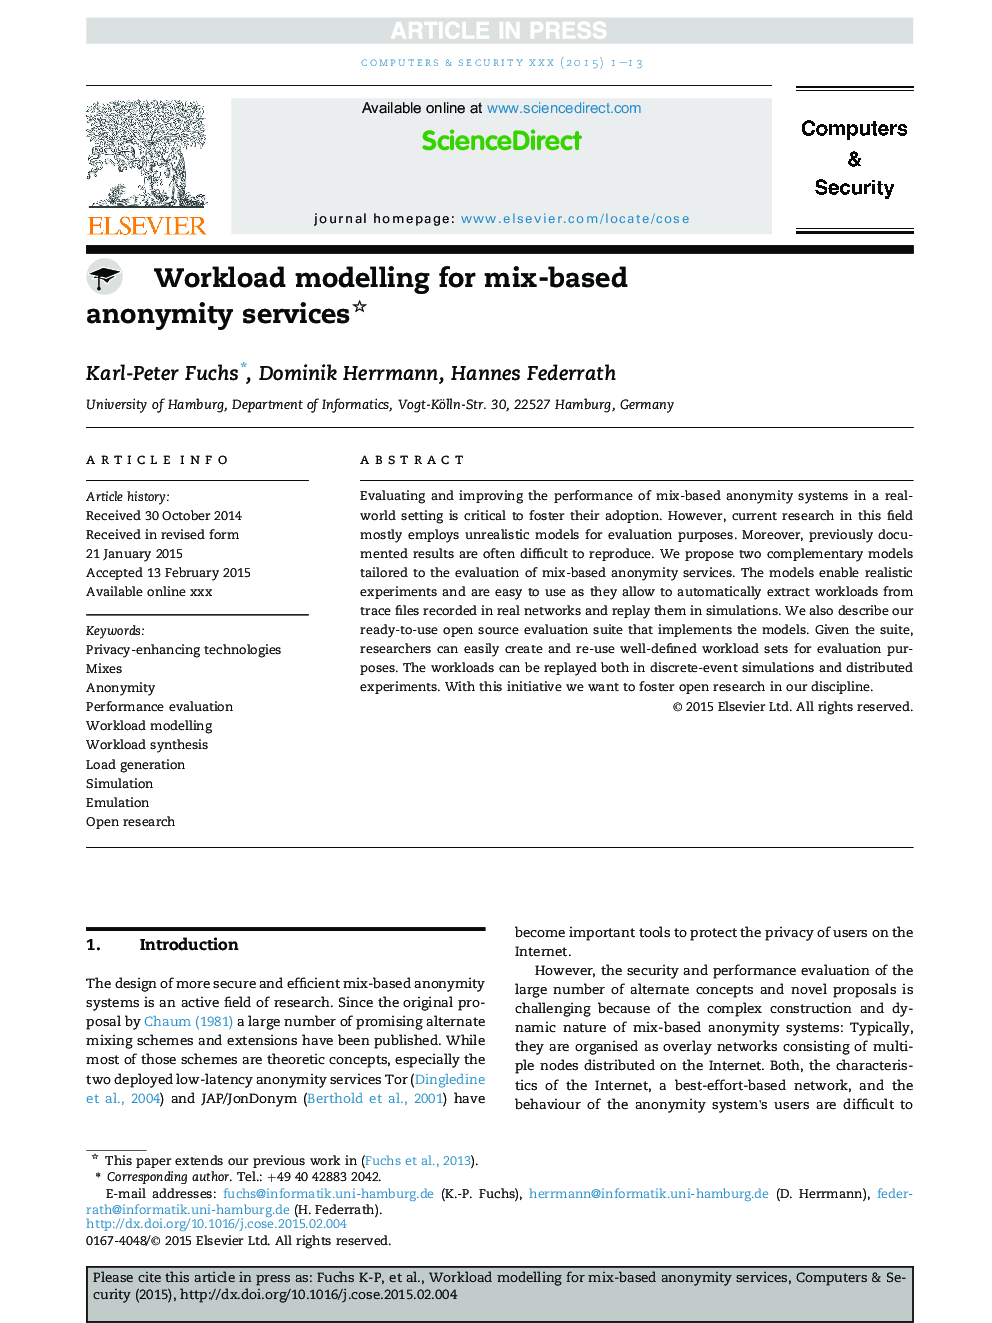 Workload modelling for mix-based anonymity services